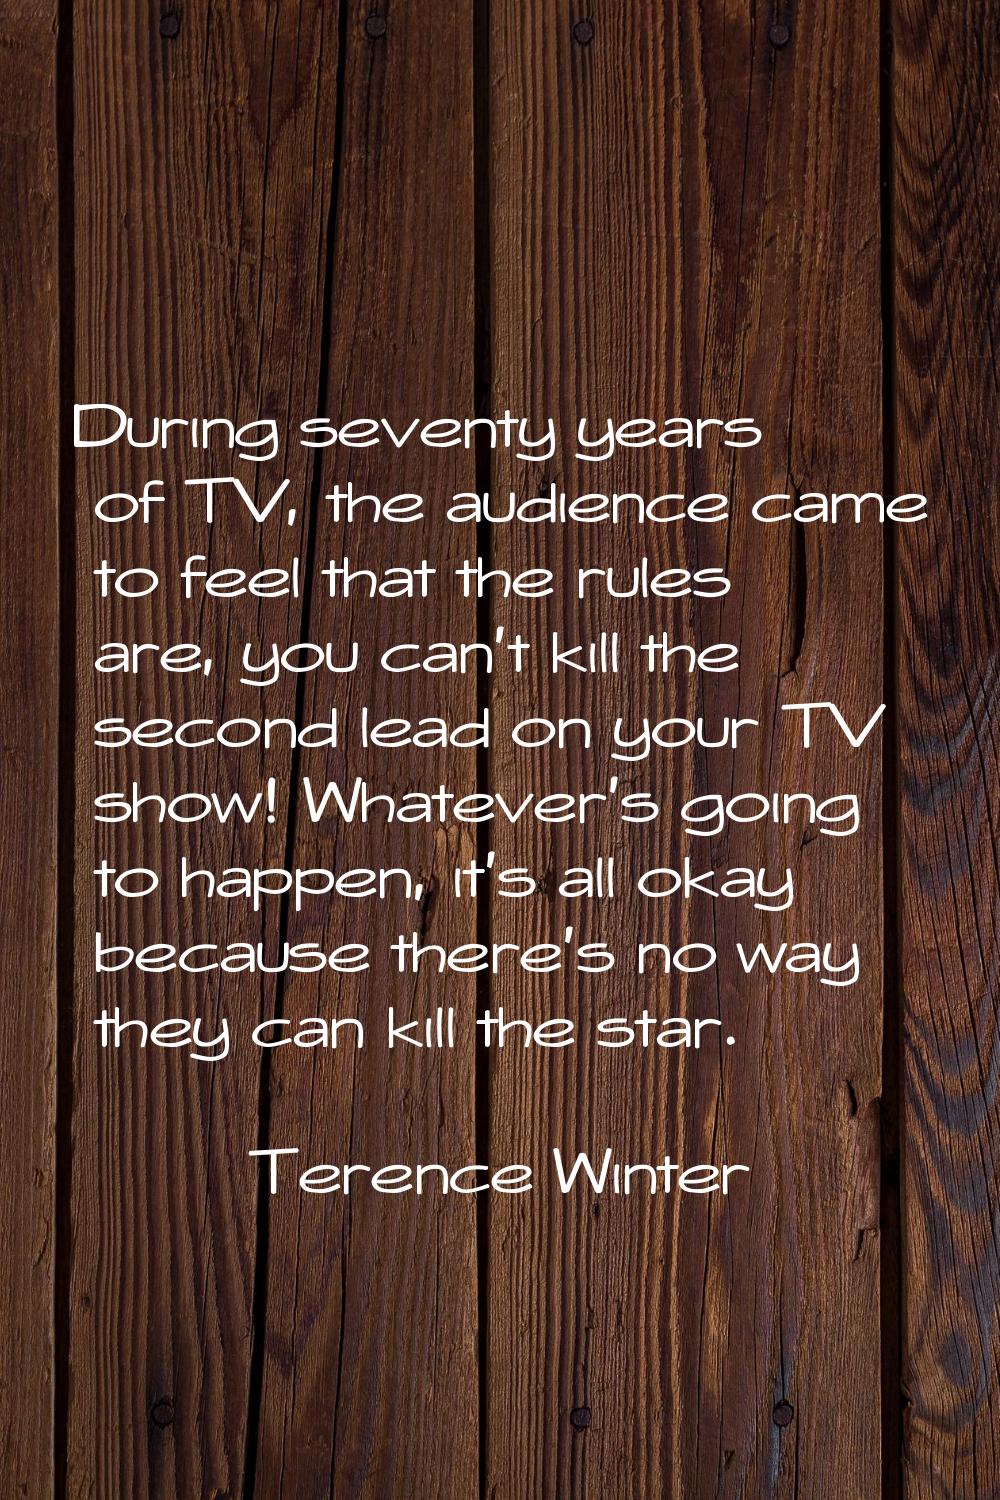 During seventy years of TV, the audience came to feel that the rules are, you can't kill the second